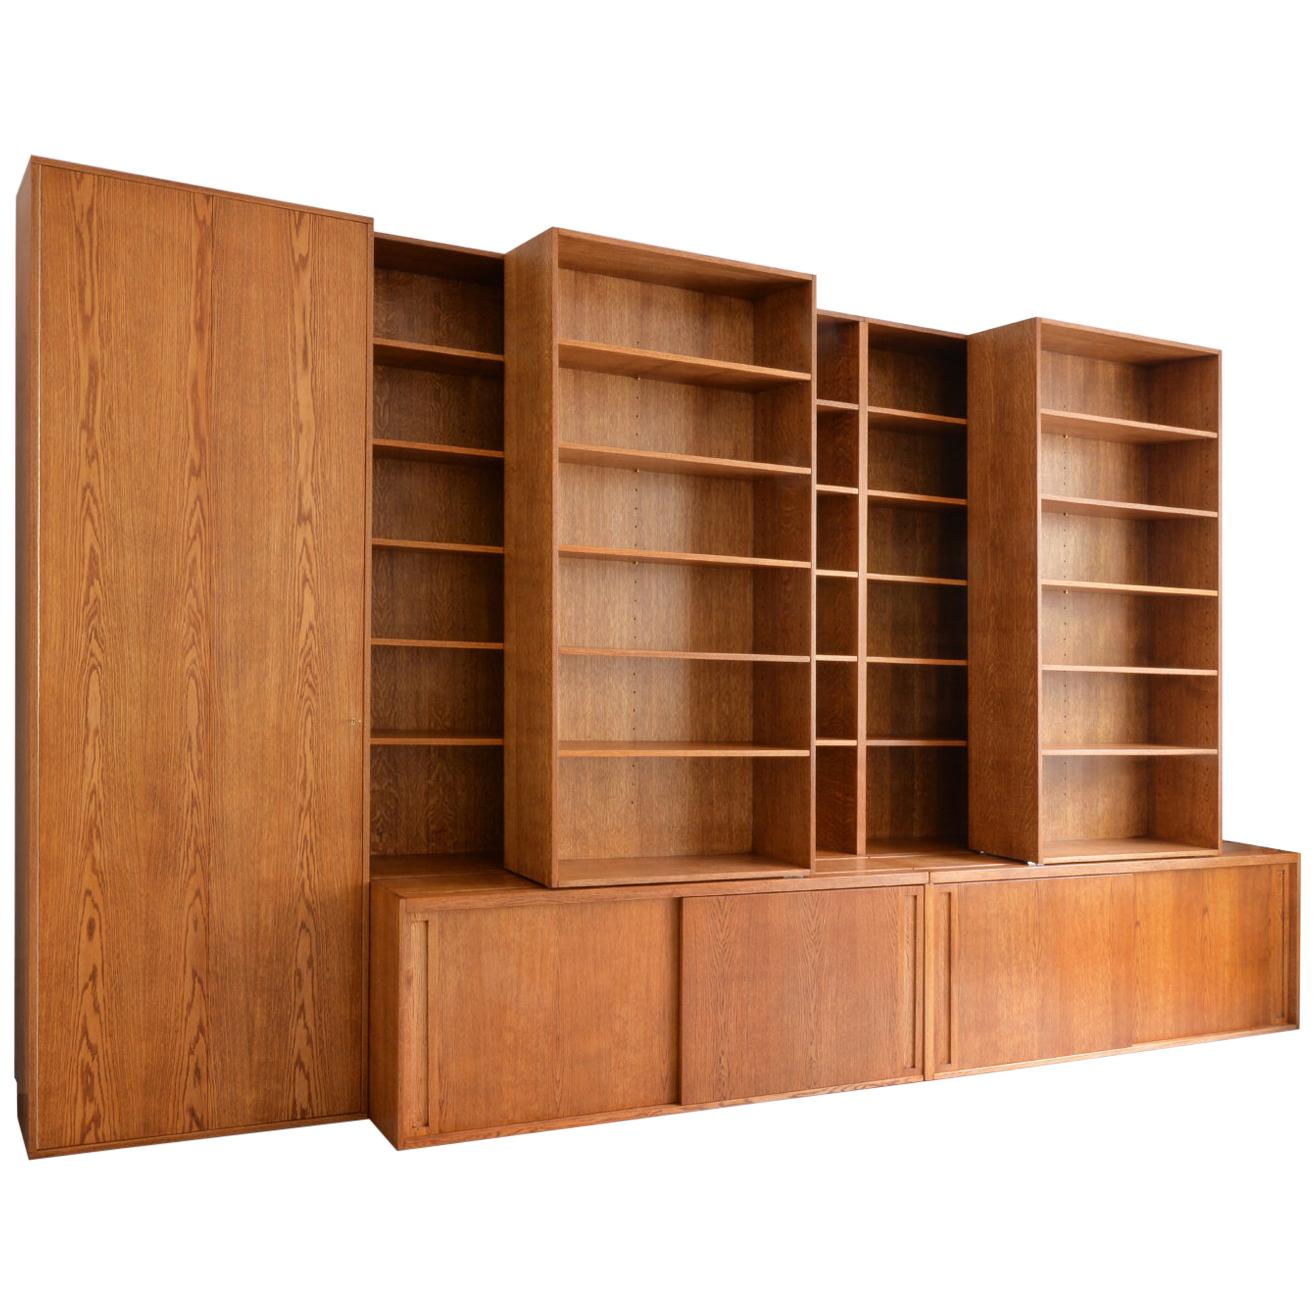 Customized Bookshelf in Handcrafted Wood with Sliding and Adjustable Shelves For Sale